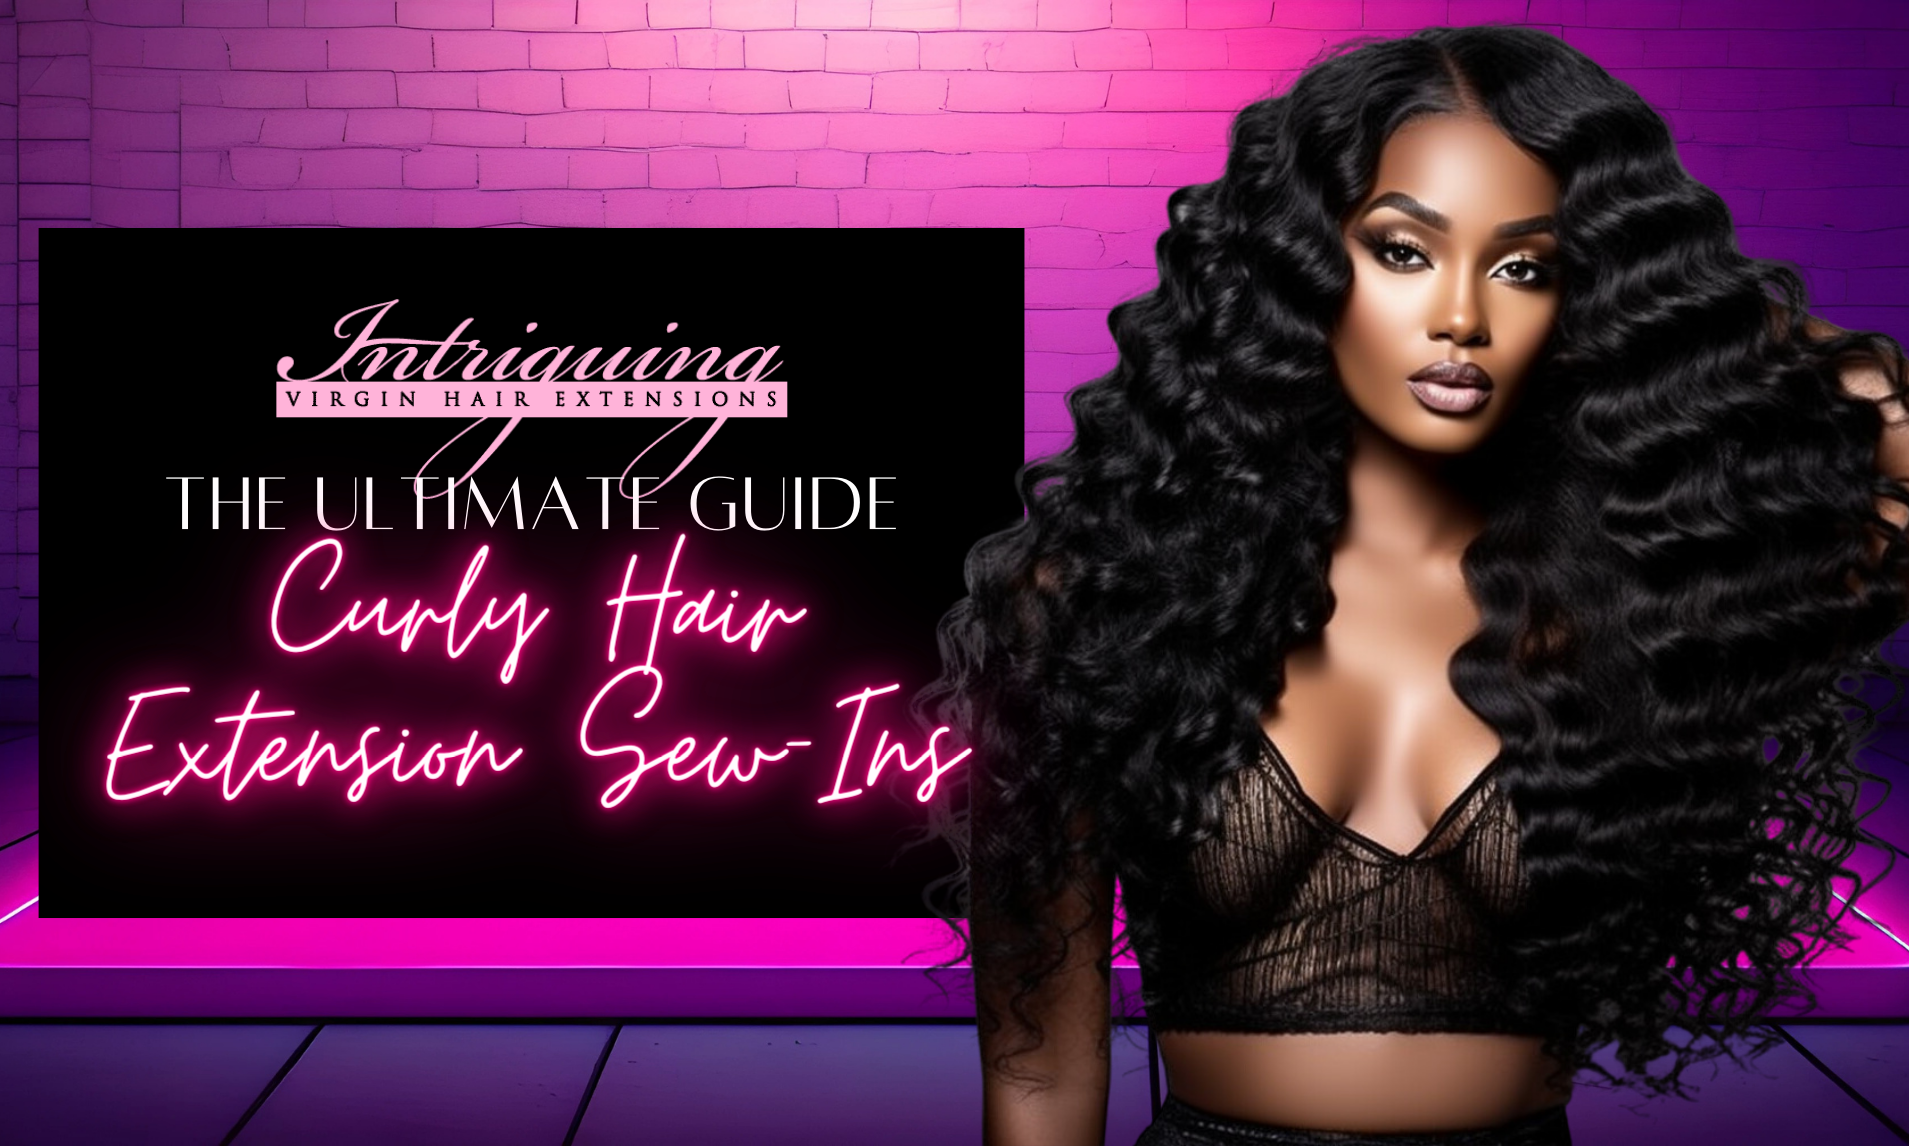 The Ultimate Guide to Curly Hair Extension Sew-Ins